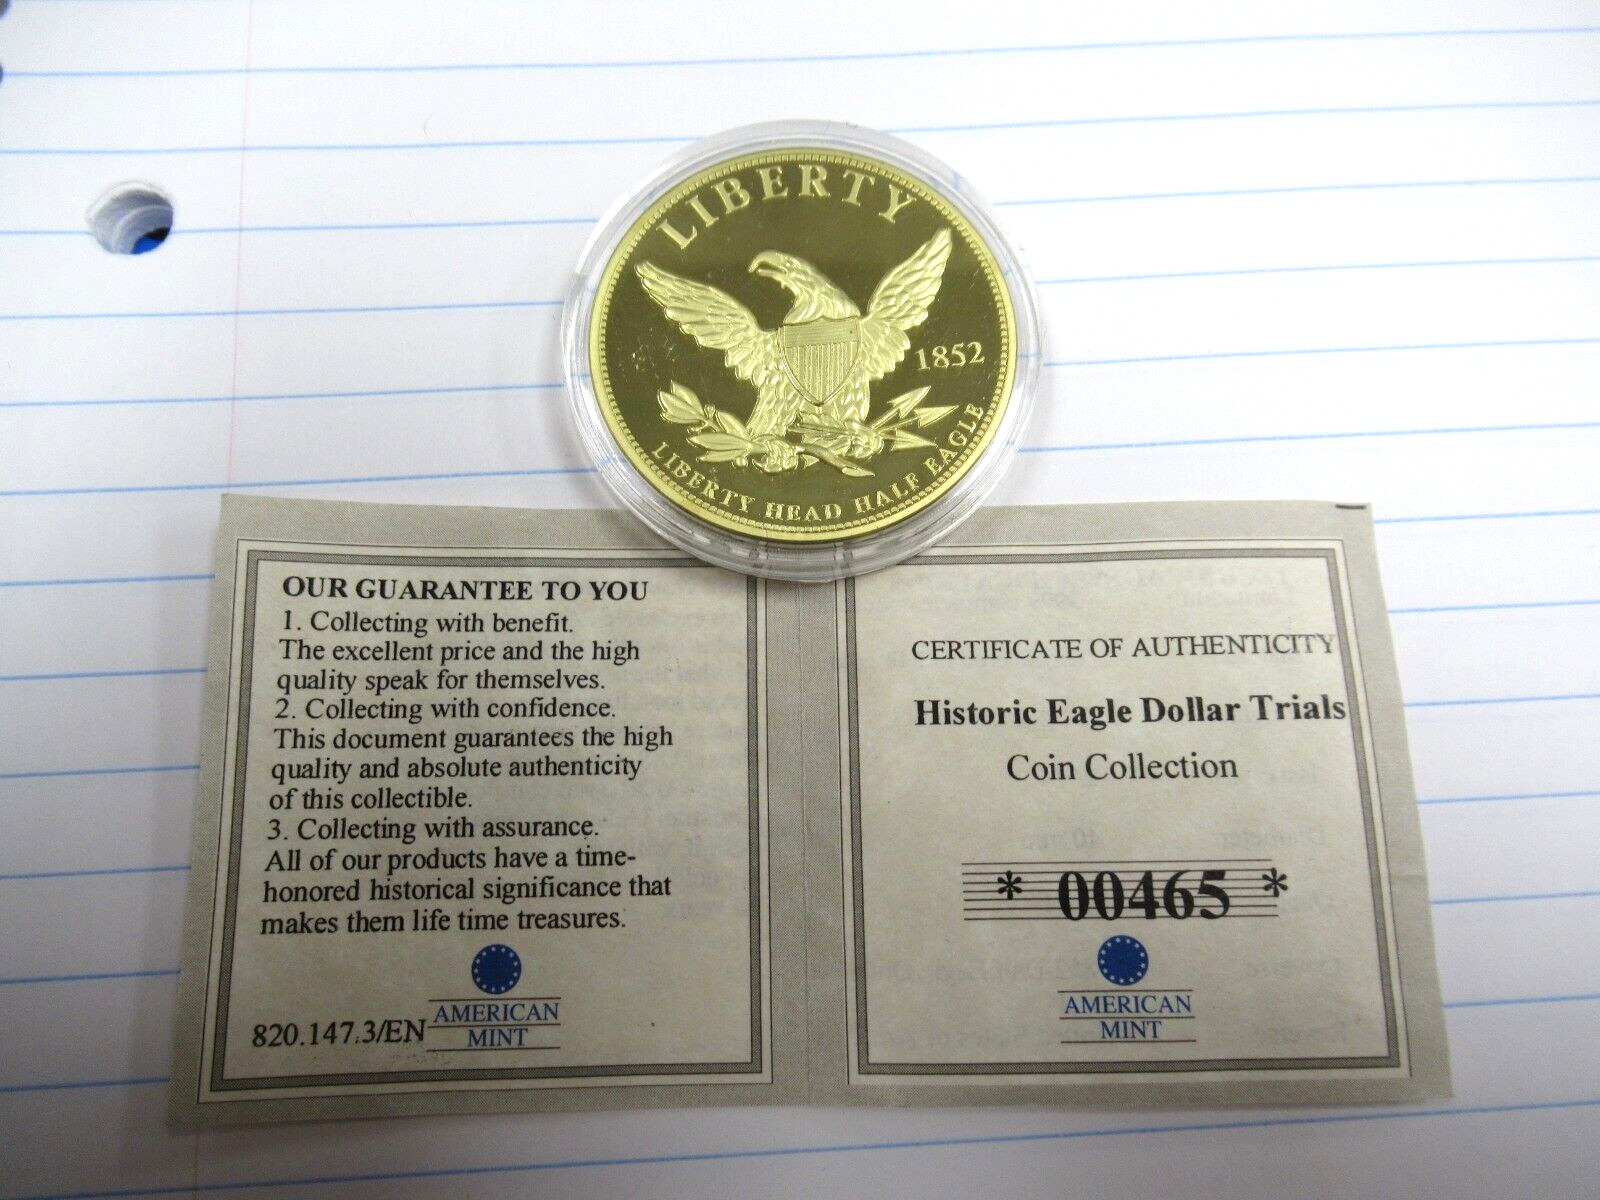 American Mint 1852 Half Eagle Dollar Trial Fantasy 40mm Proof Coin Layered in24K